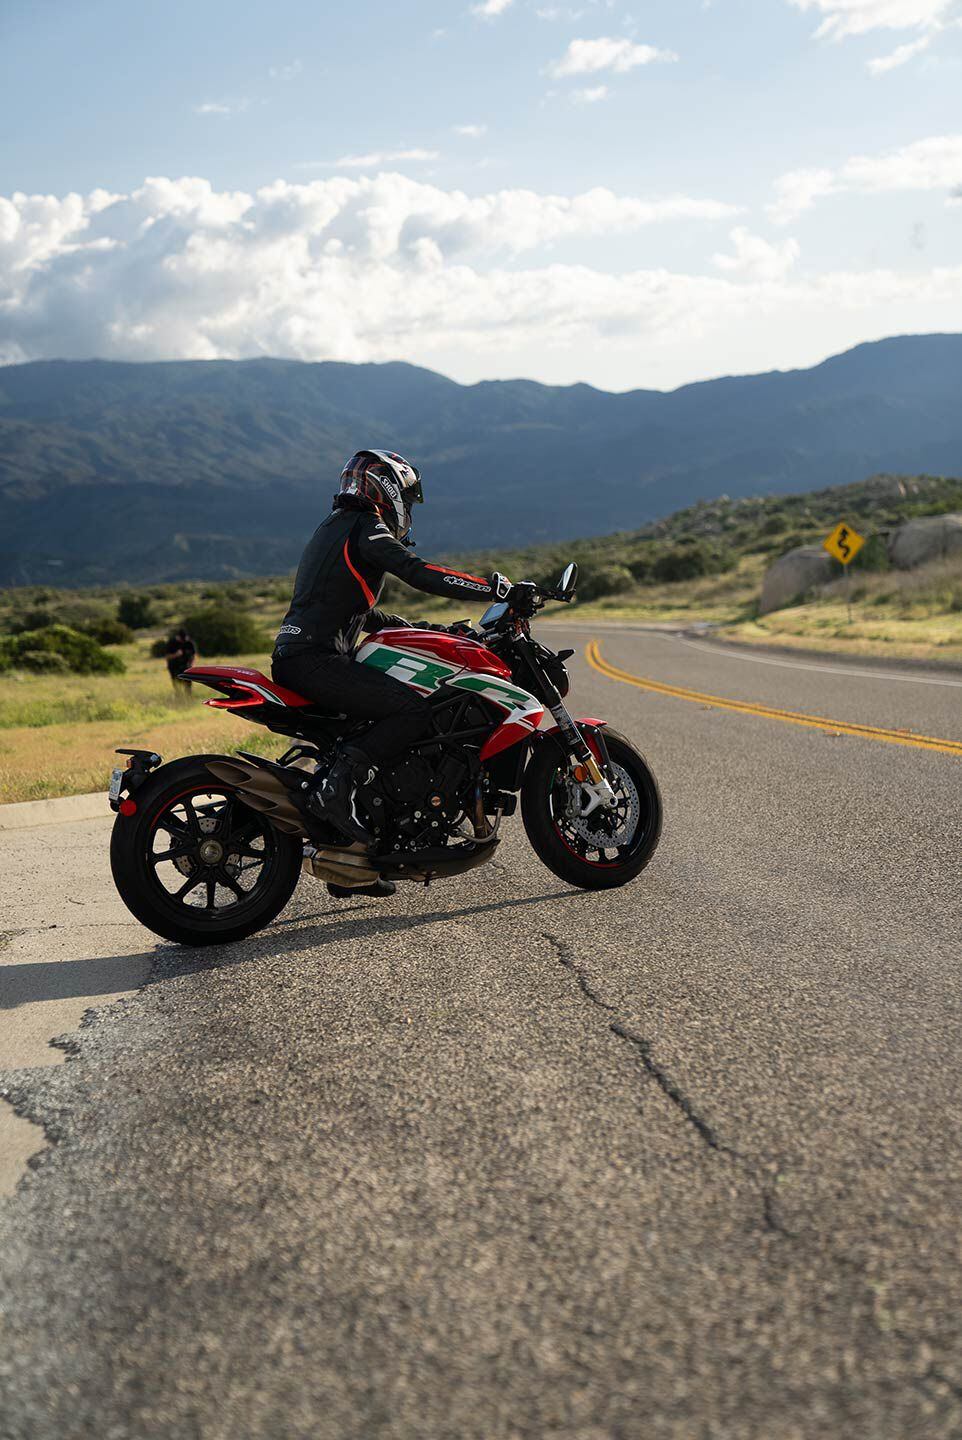 The Dragster is a surprisingly nimble and easy-to-maneuver motorcycle.